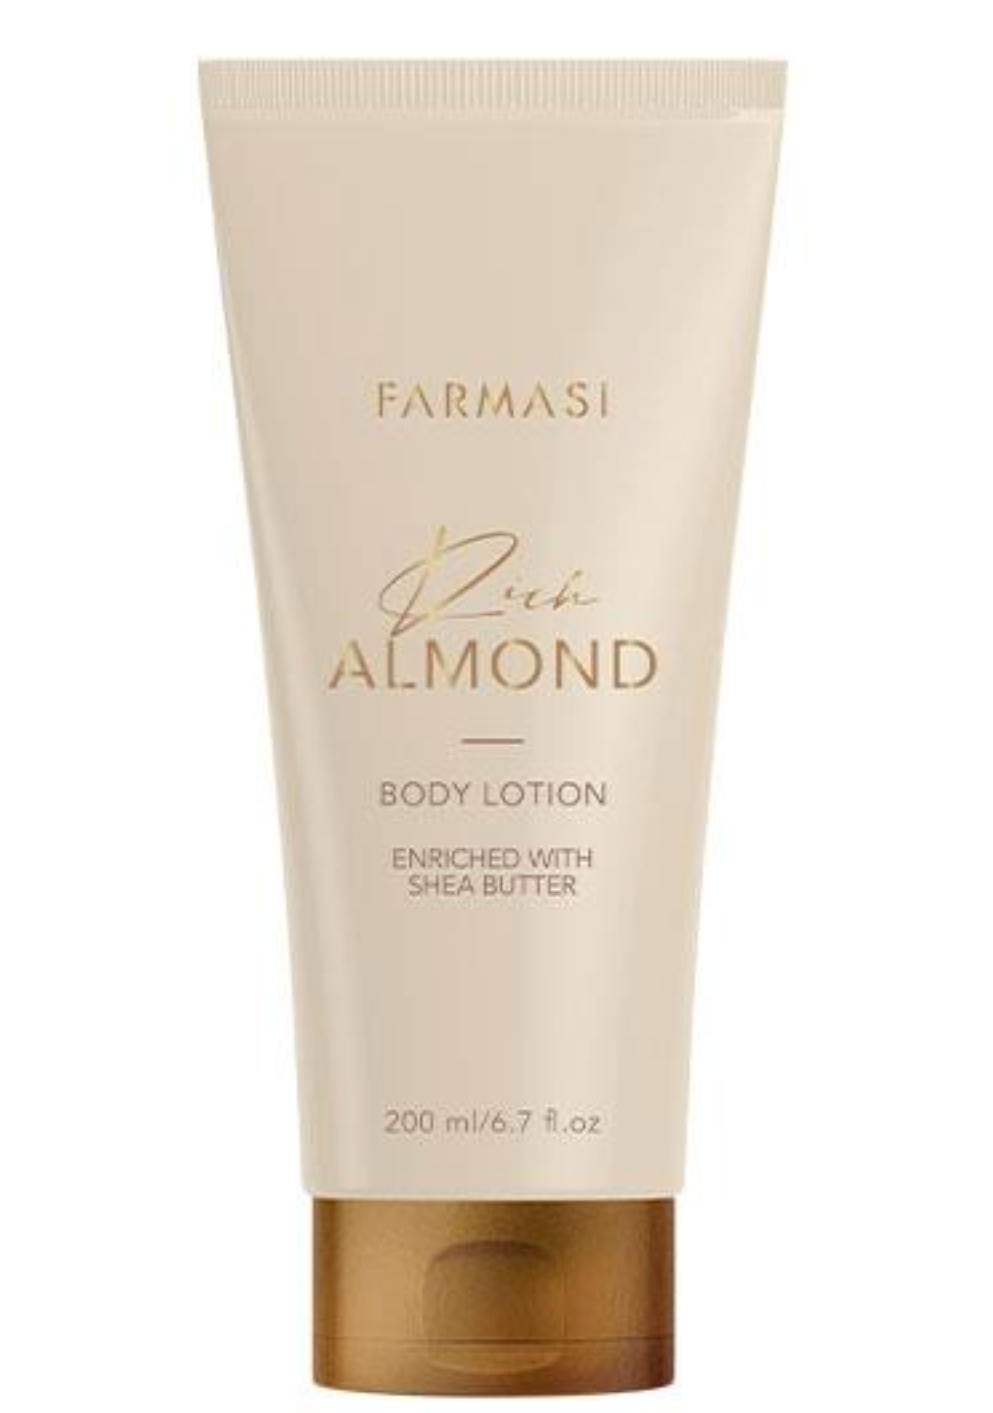 Rich Almond Body Lotion - JustBelieve.Boutique